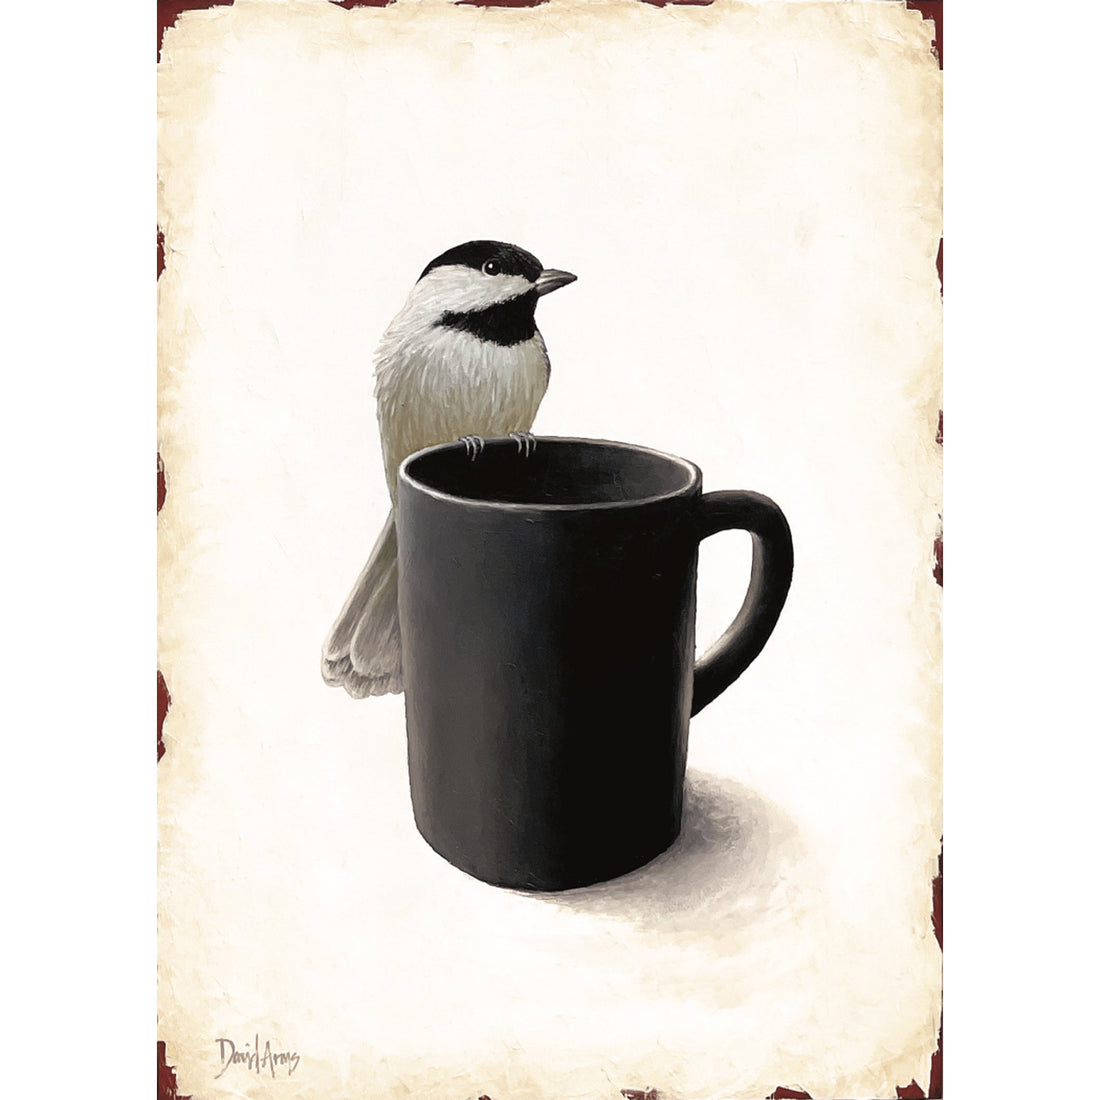 An illustration of a chickadee resting on the edge of a black coffee cup over a light tan background with patinaed edges. 